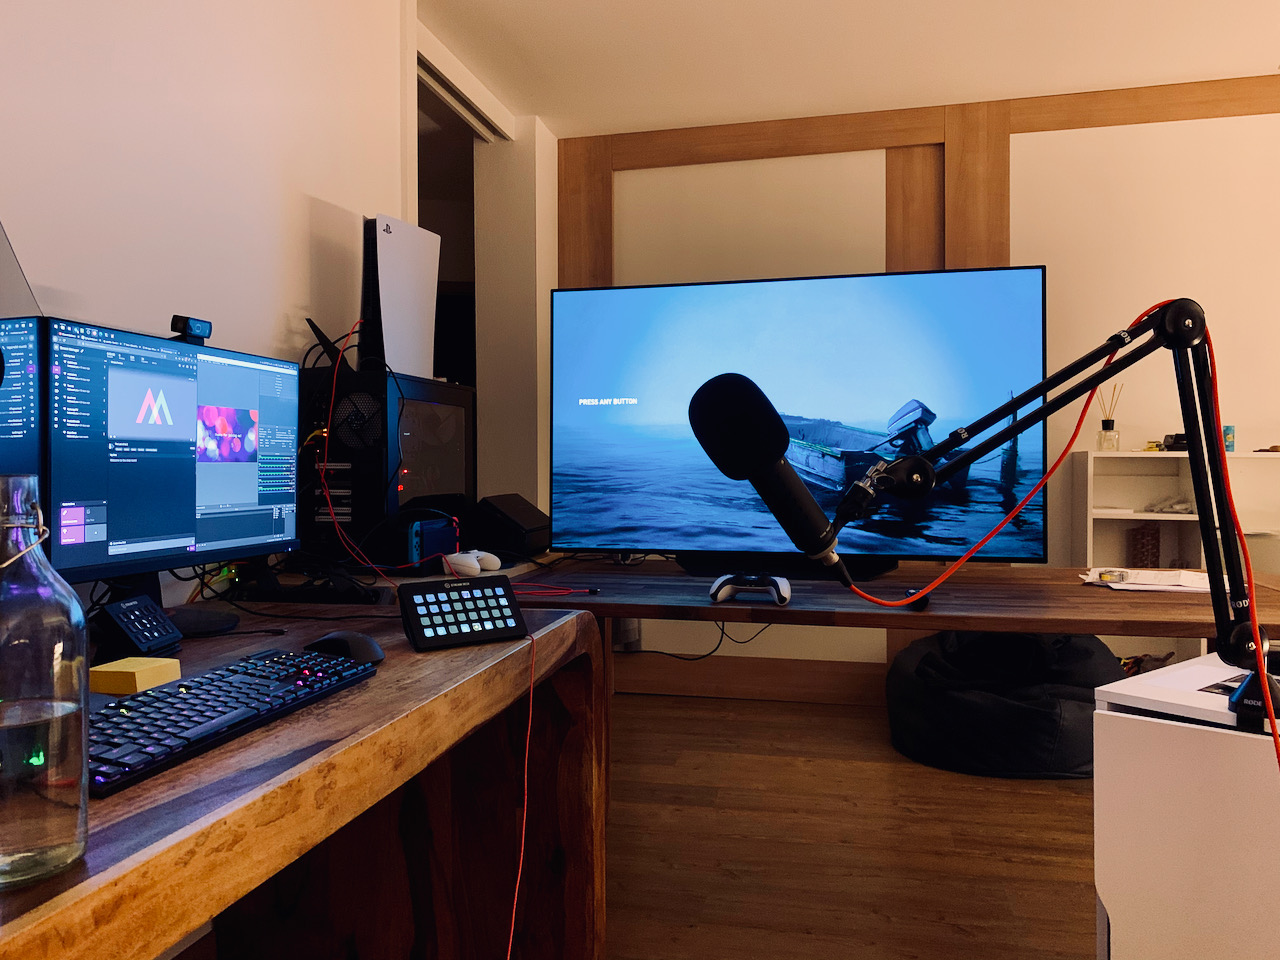 Current state of my setup.